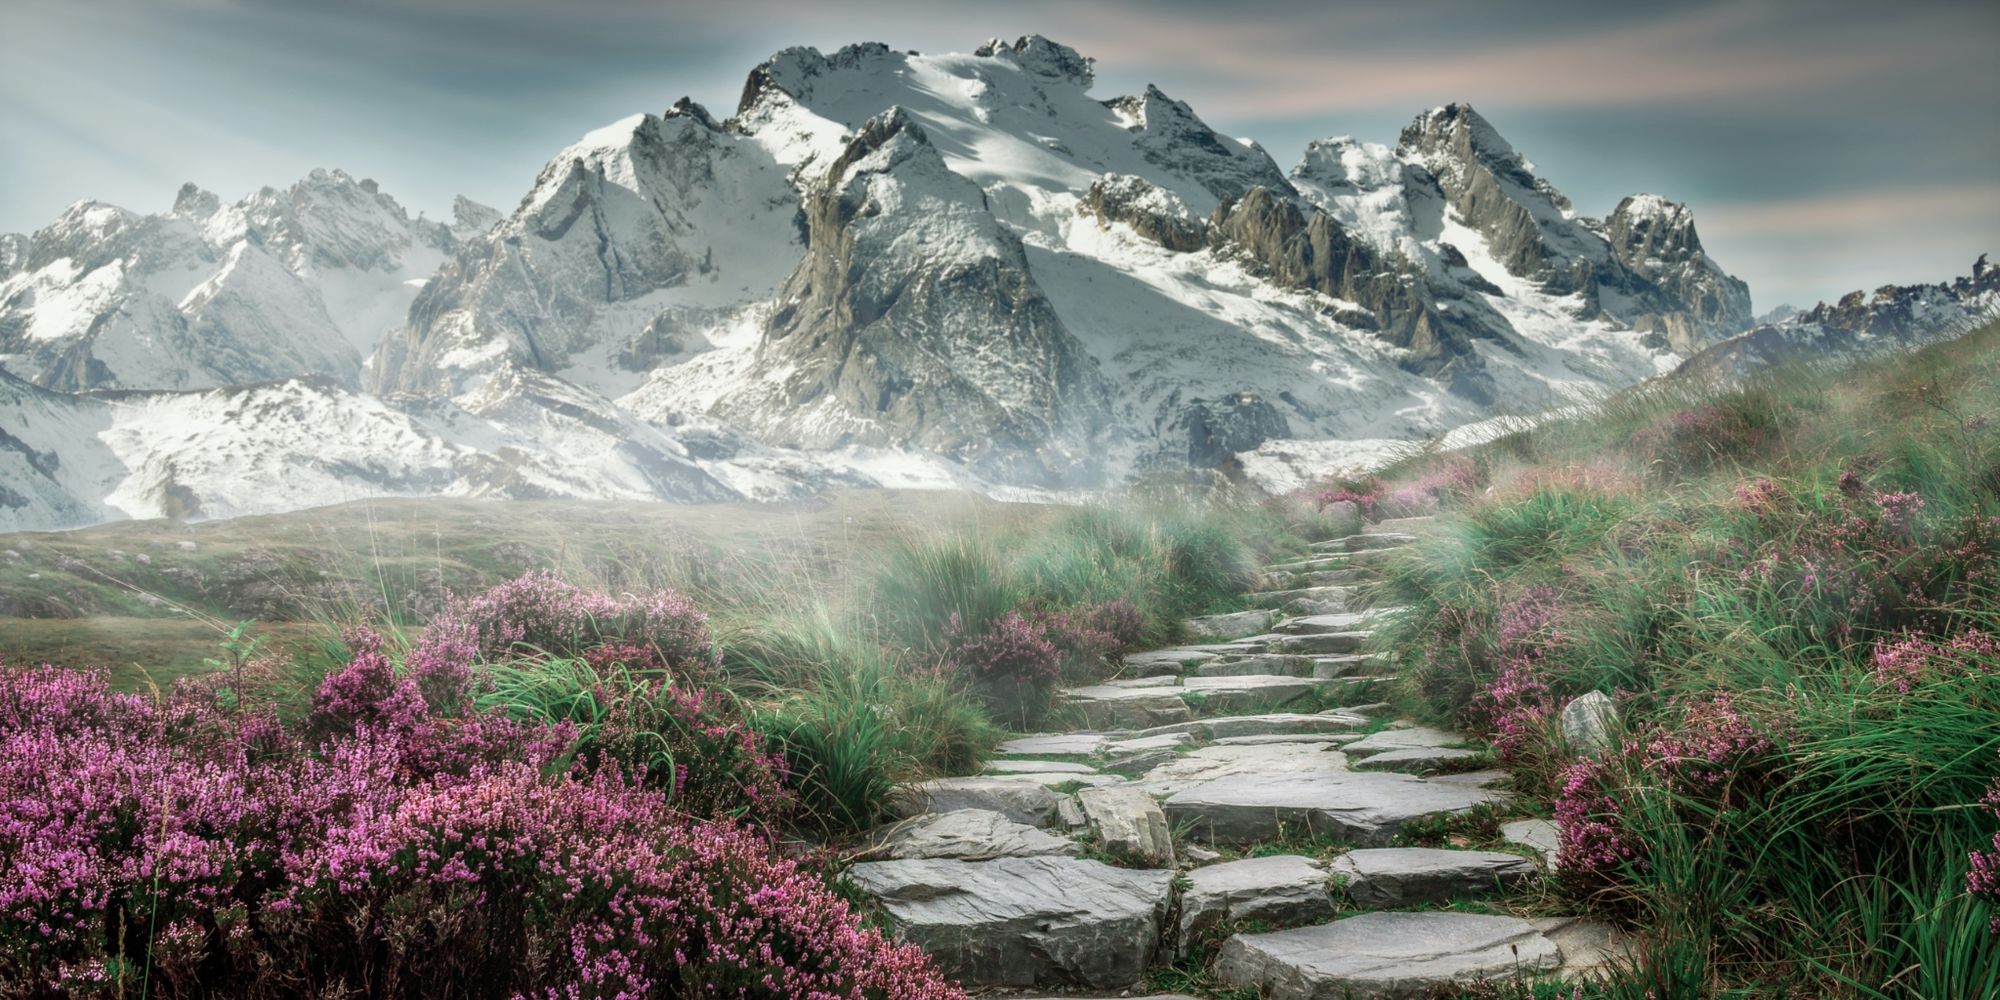 A path surrounded by flowers and green plants, heading towards mountains covered in snow.